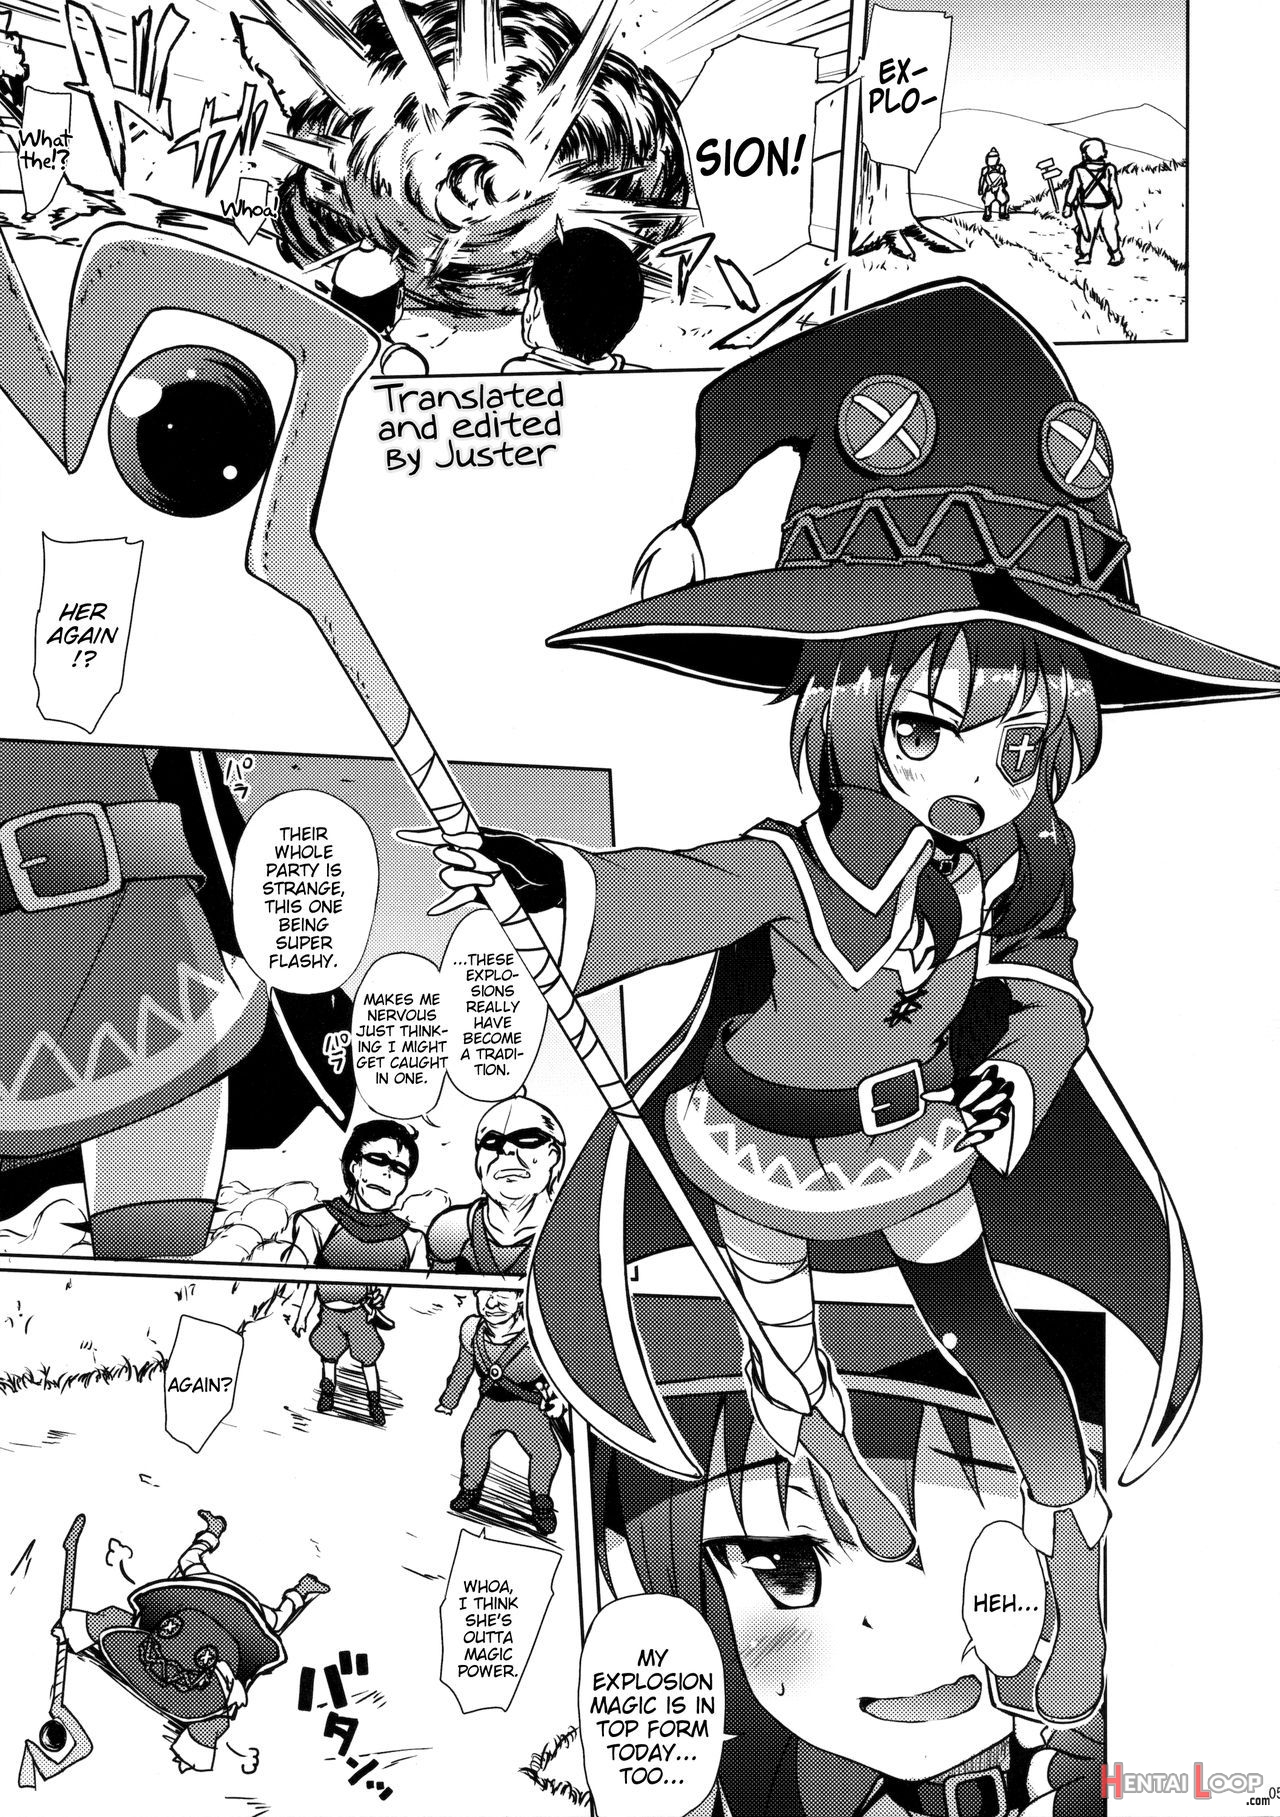 Disaster Upon This Megumin! page 3